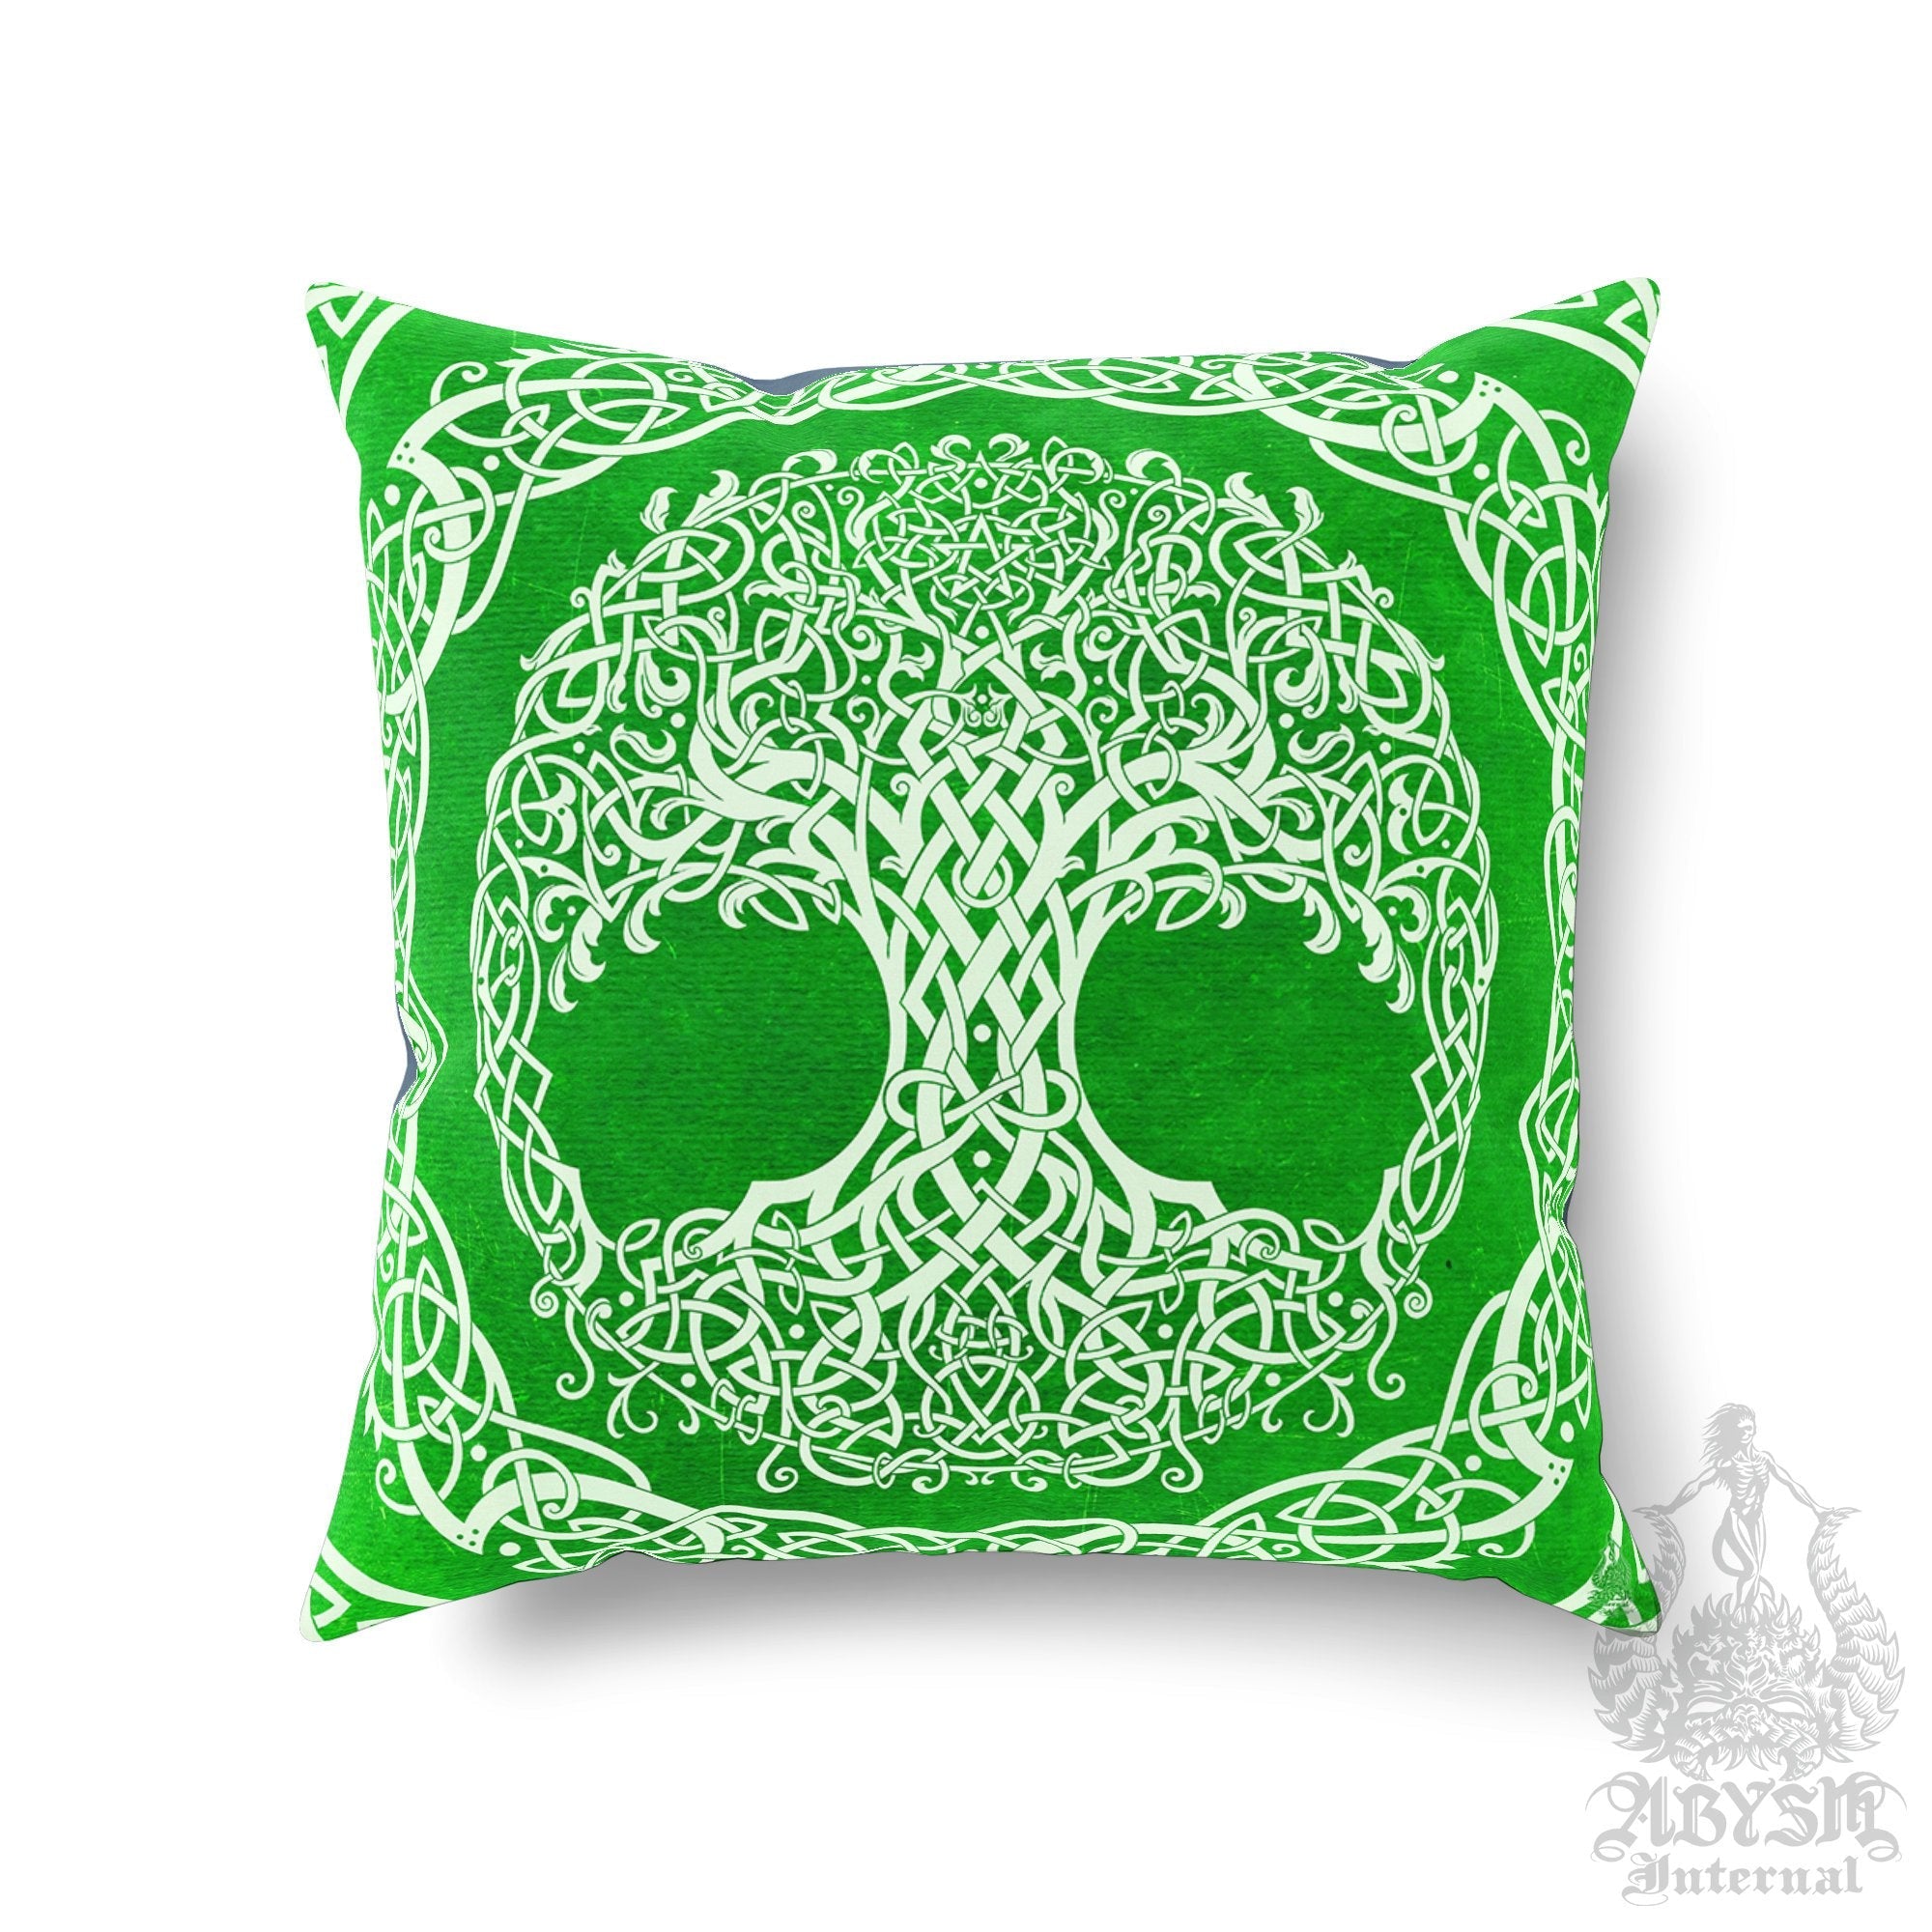 Witch Throw Pillow, Decorative Accent Cushion, Tree of Life, Wicca Room Decor, Witchy Art, Celtic Knot, Funky and Eclectic Home - Green - Abysm Internal